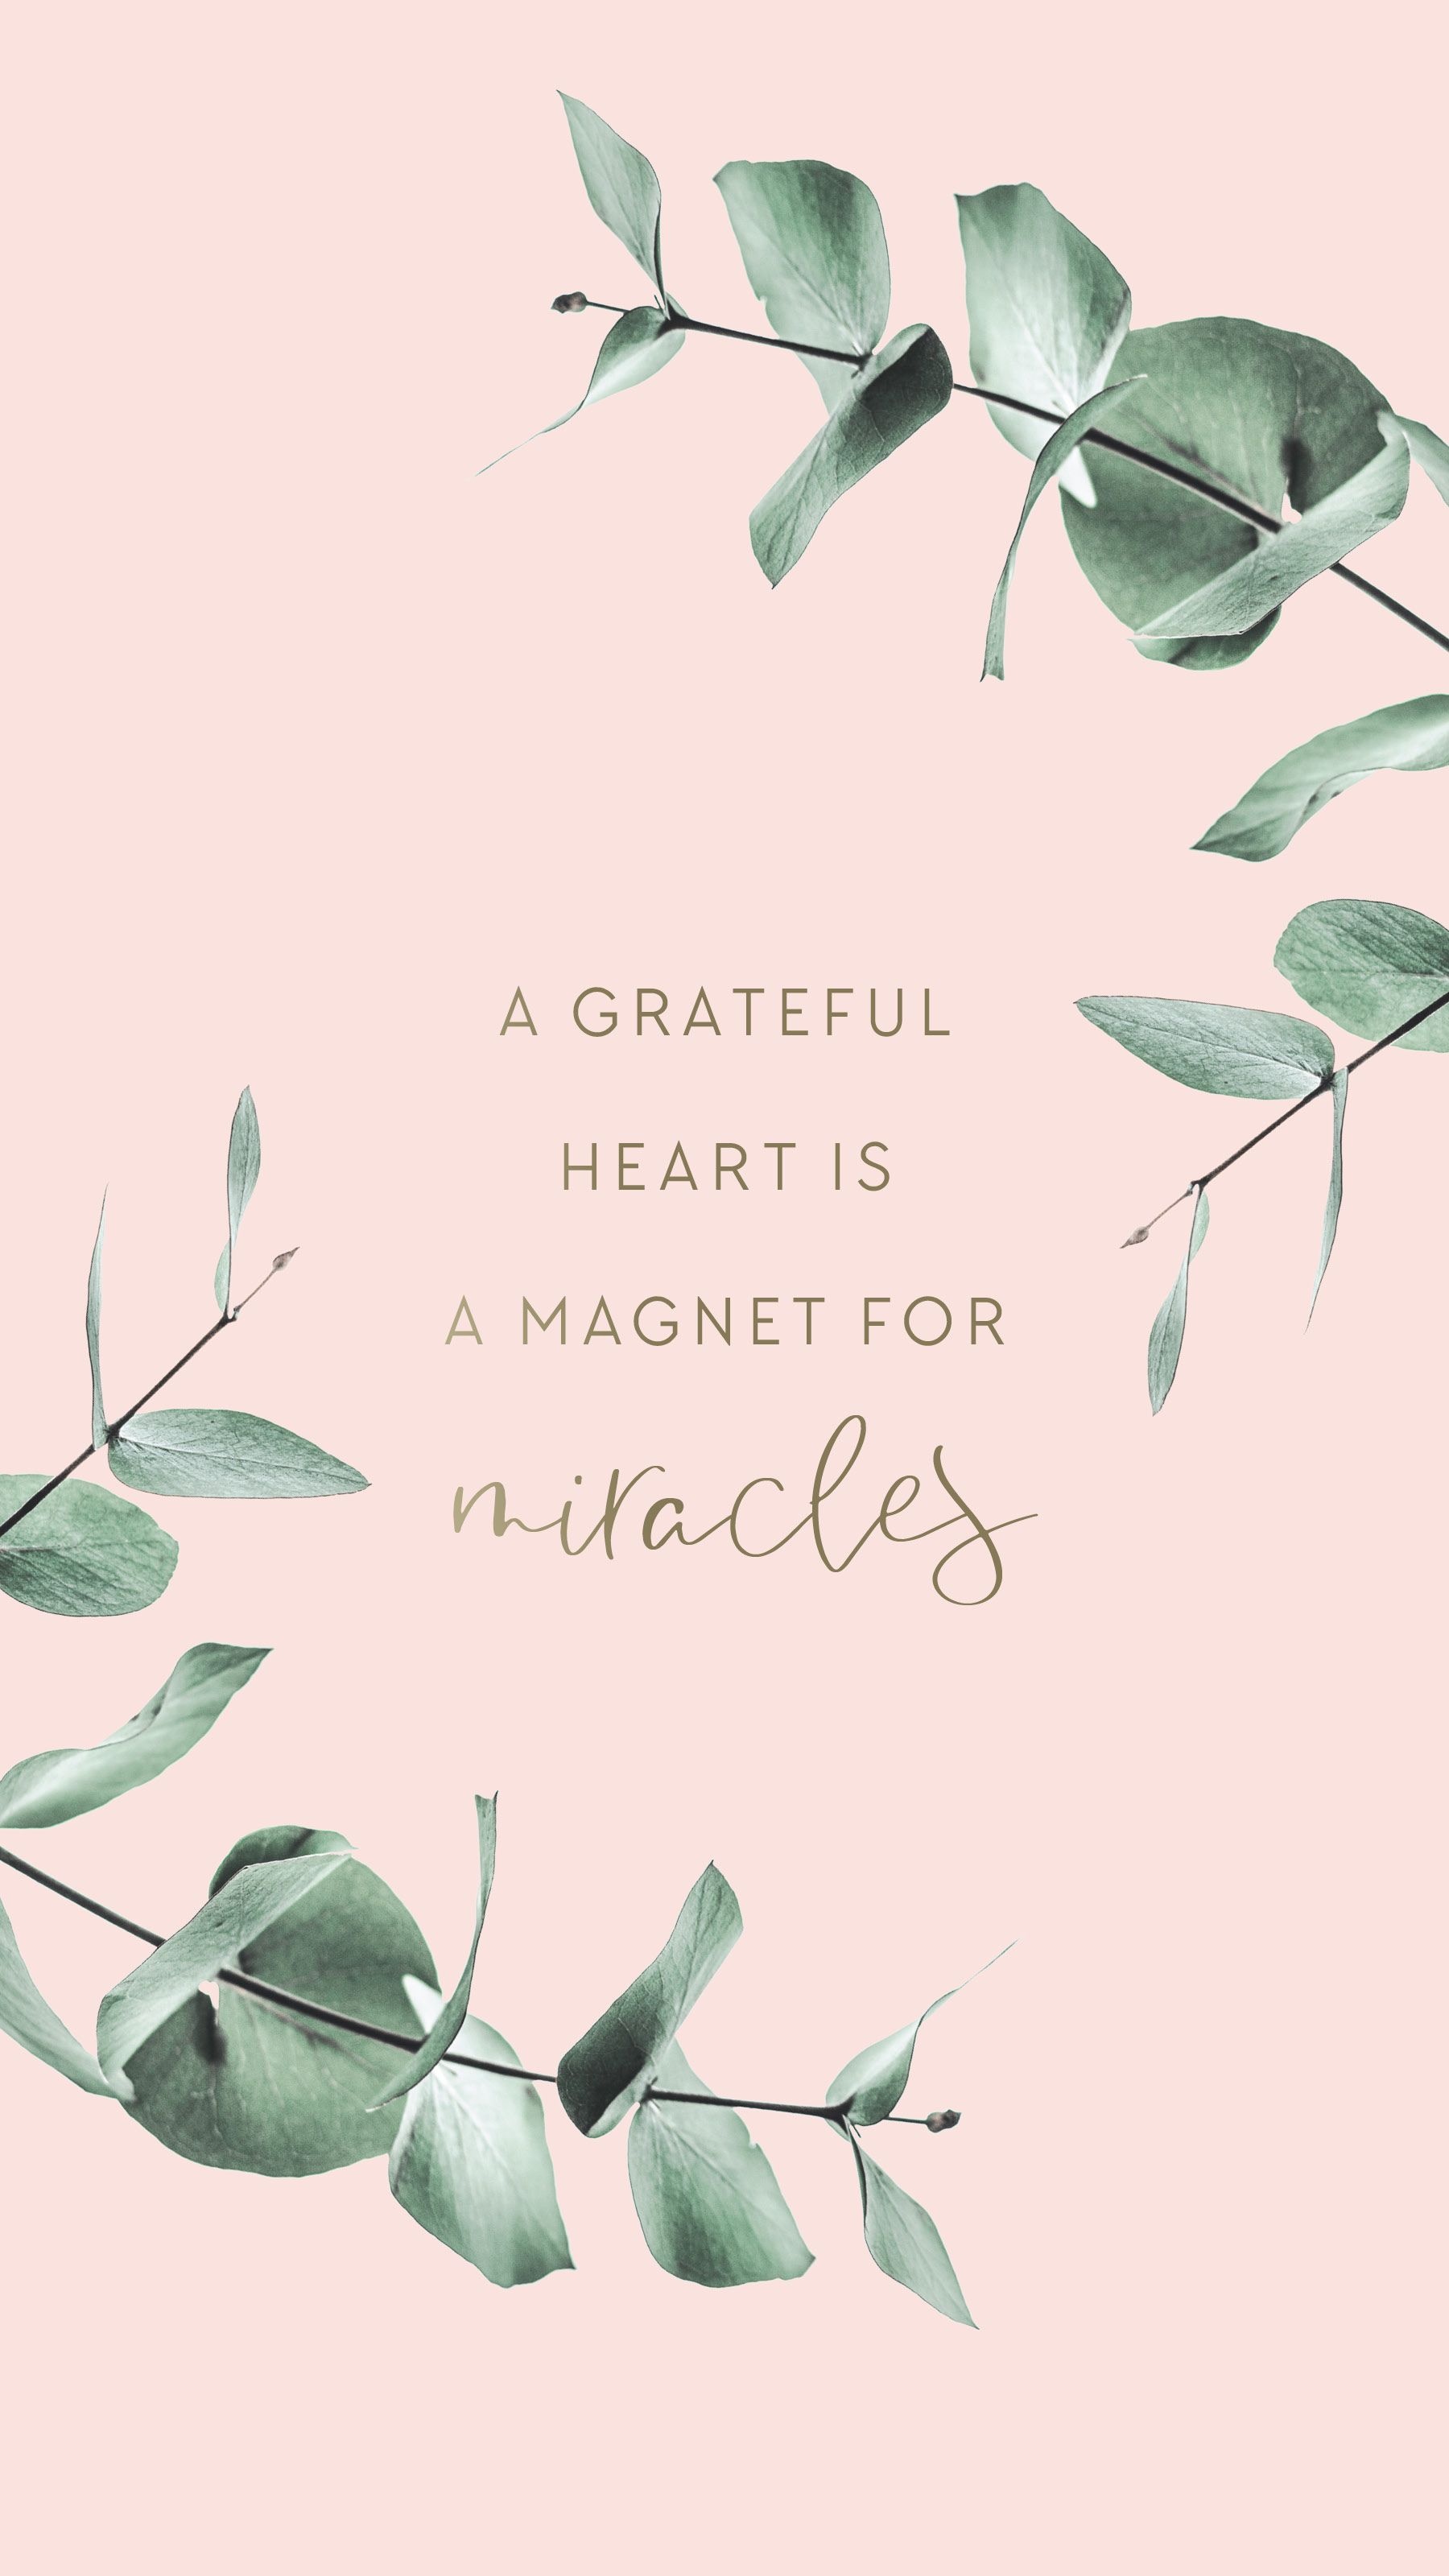 Gratitude: A Grateful Heart Is a Magnet for Miracles, A coloring journal by Vicki Becker, Motivation. 1800x3200 HD Background.